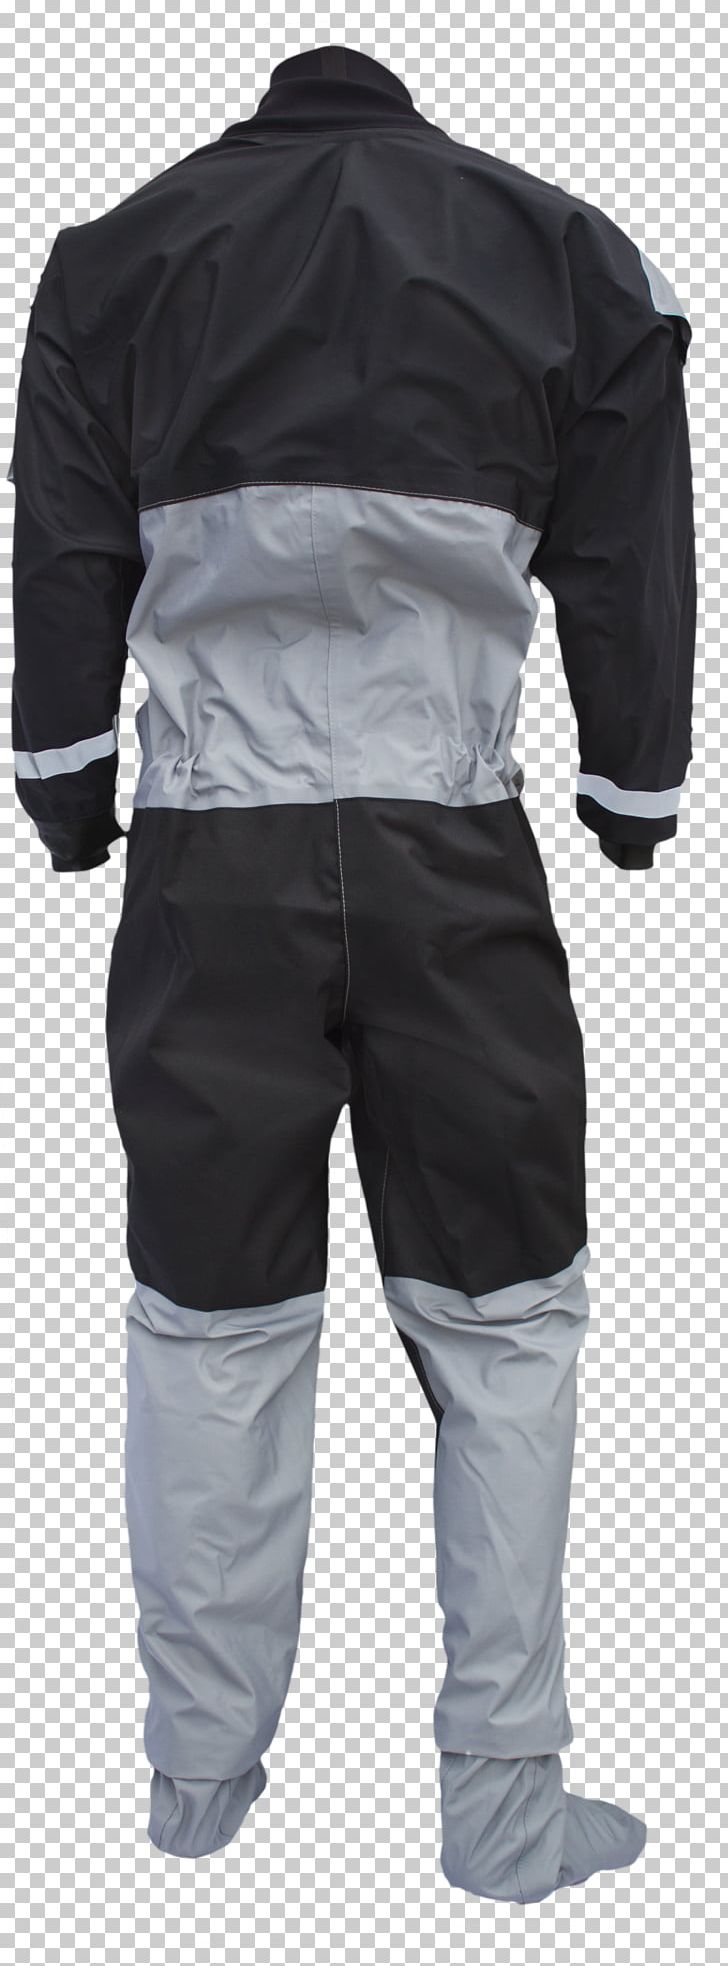 Dry Suit Zipper Aquamarin Segelsport GmbH Dry Fashion Sportswear GmbH PNG, Clipart, Black, Boilersuit, Clothing, Dry Fashion Sportswear Gmbh, Dry Suit Free PNG Download